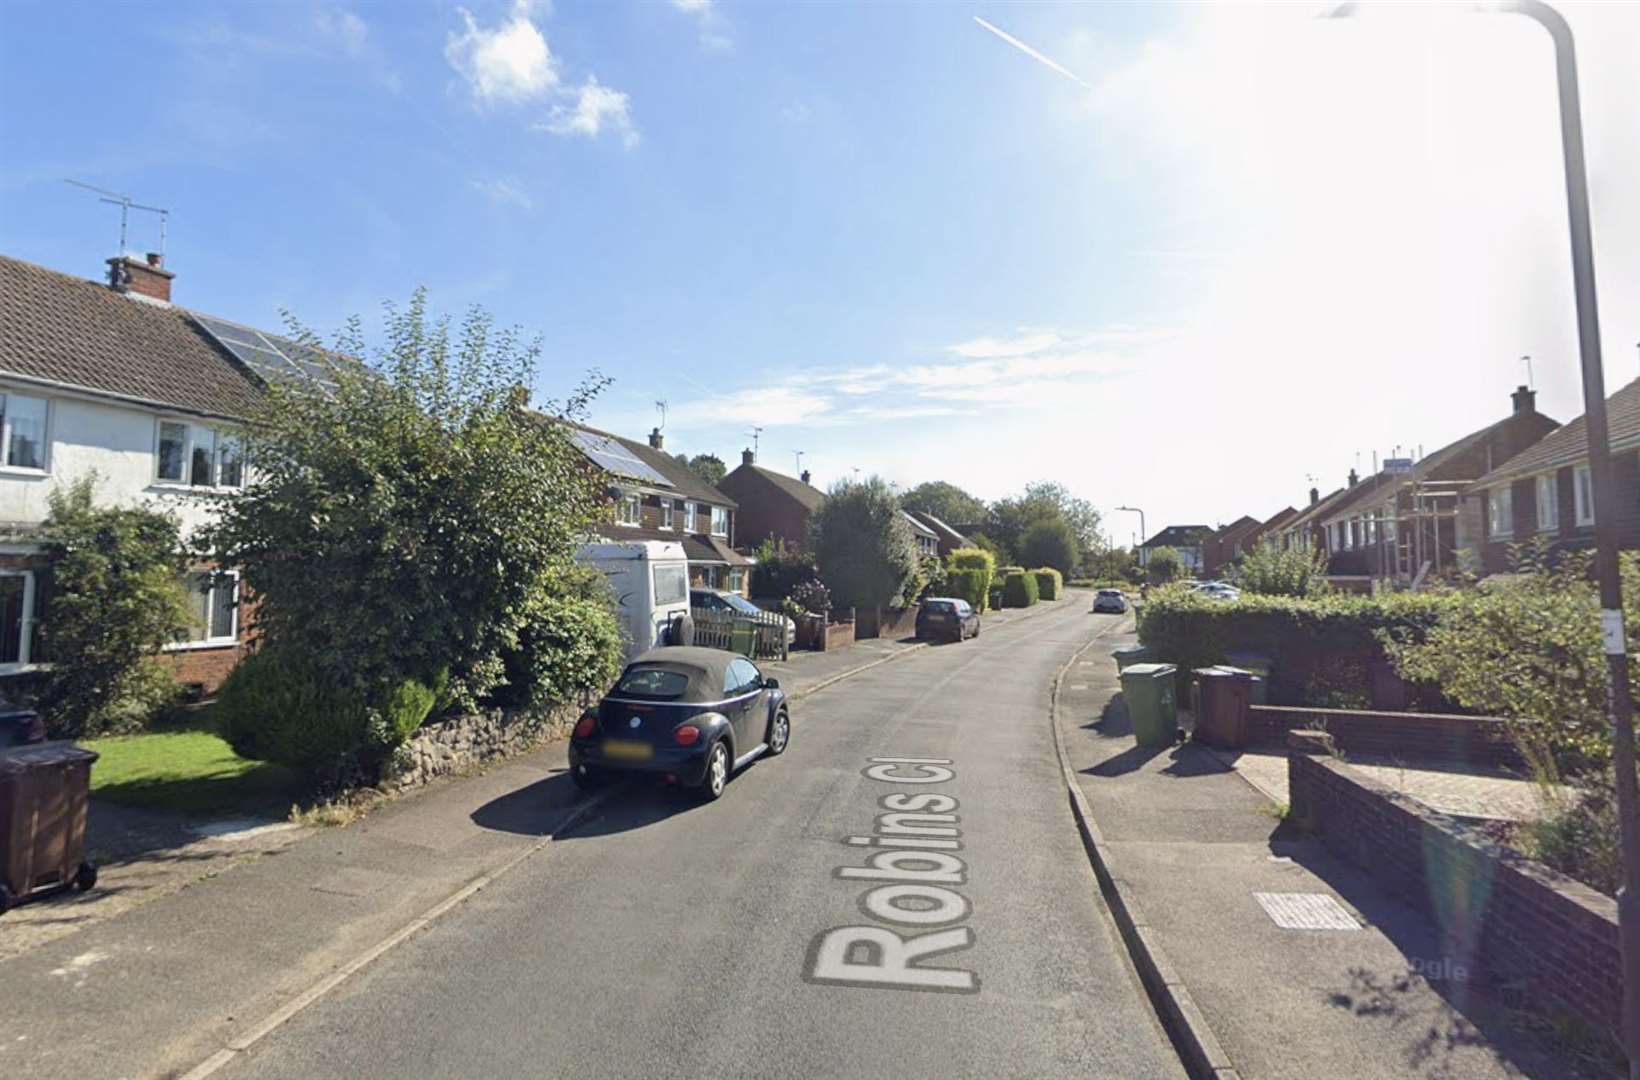 A man has died after a house fire in Robins Court in Lenham, Maidstone. Picture: Google Maps